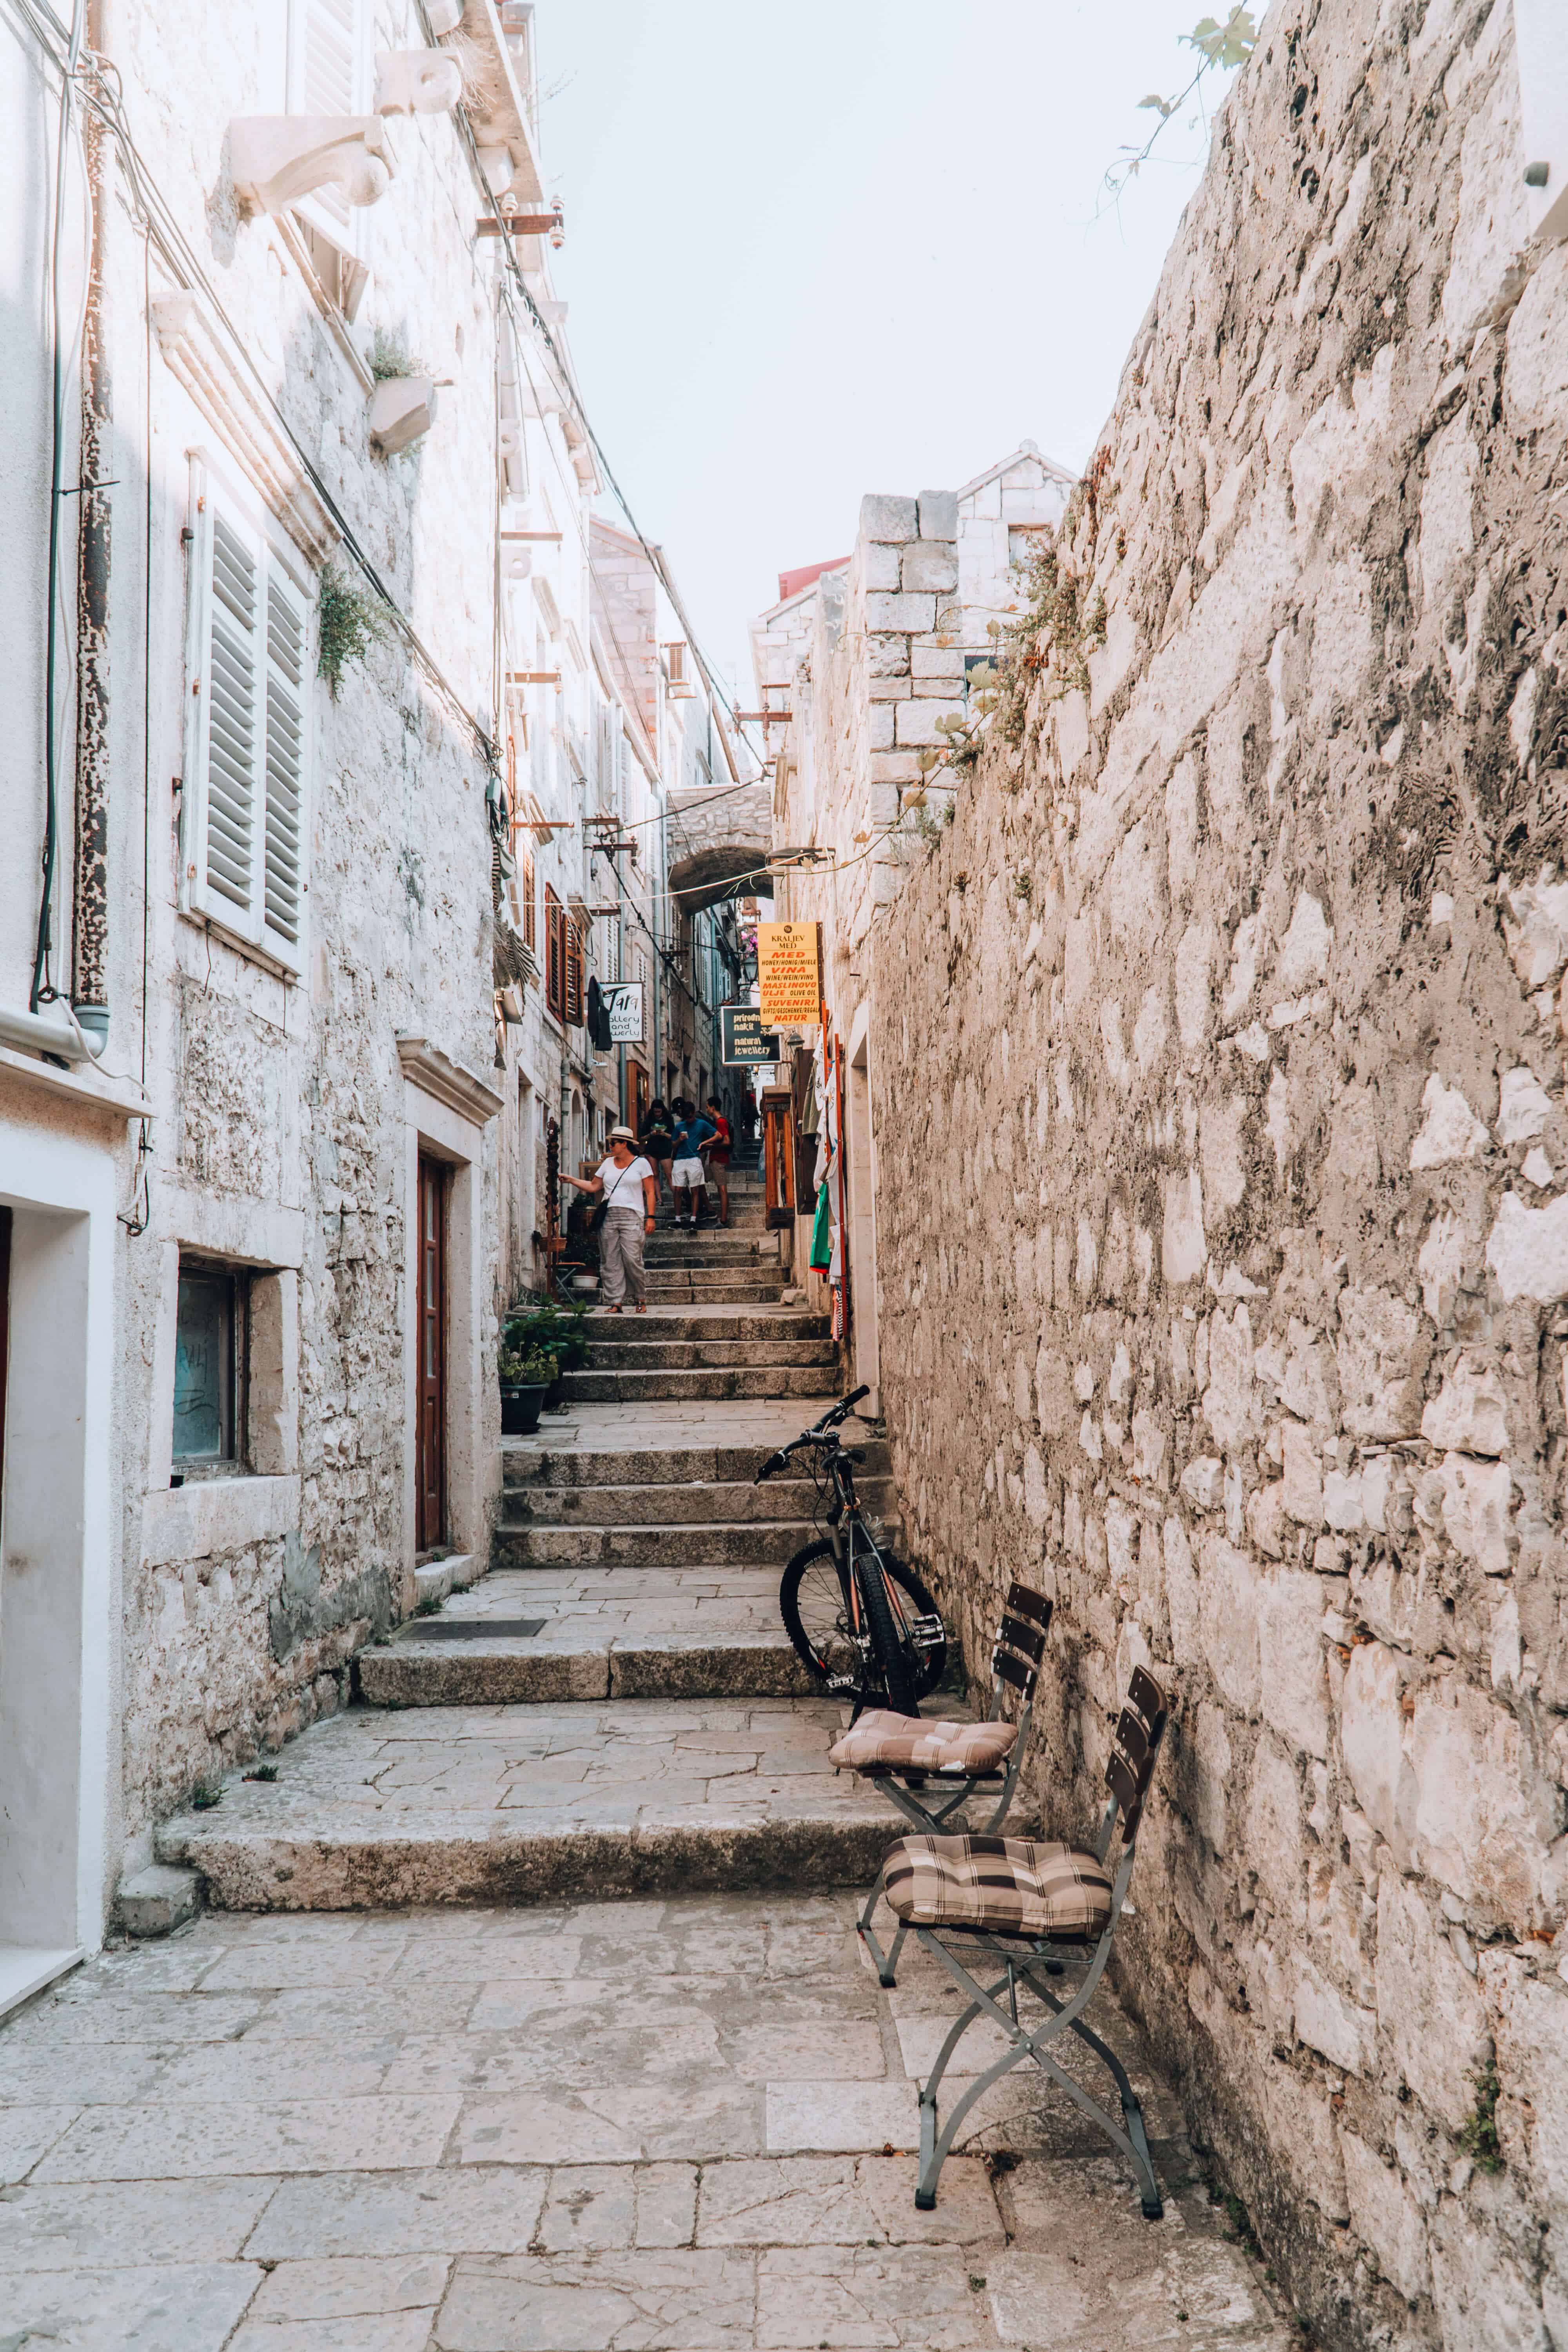 HOW TO SPEND ONE DAY IN KORCULA, CROATIA | Cute little alleyway | The Republic of Rose